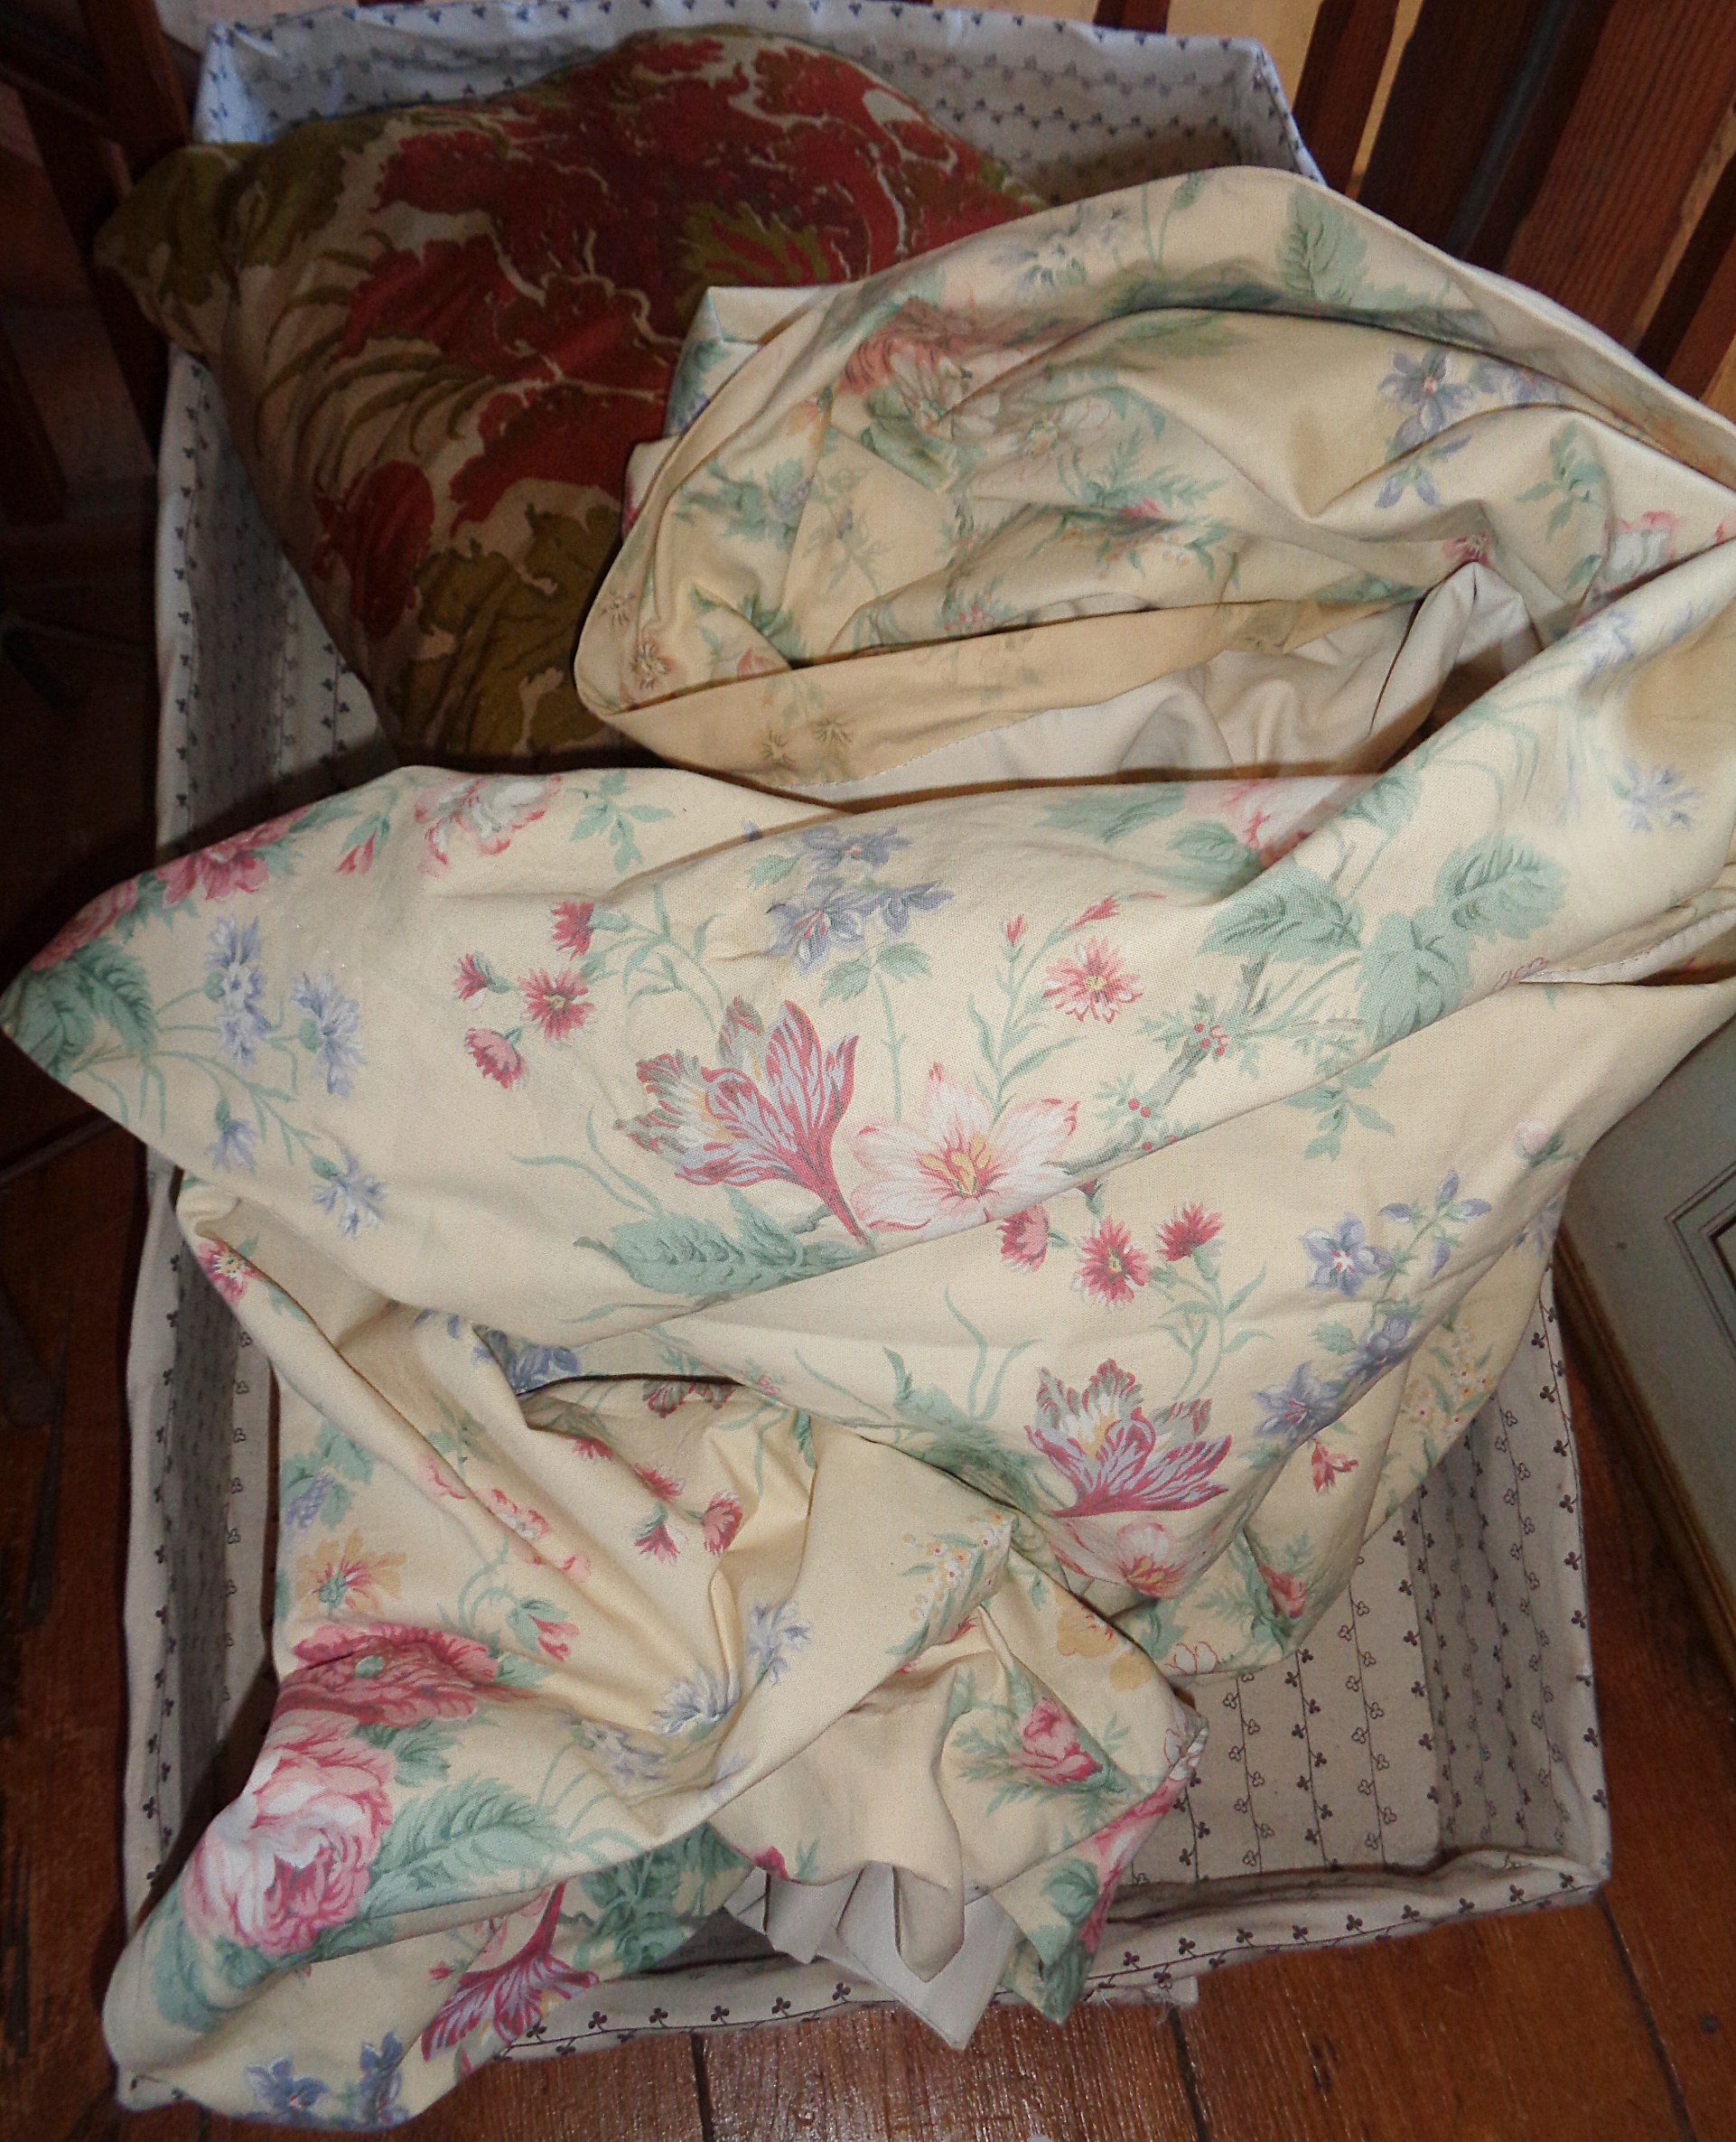 Fabric covered baguette basket tray and a pair of Sanderson curtains and a cushion